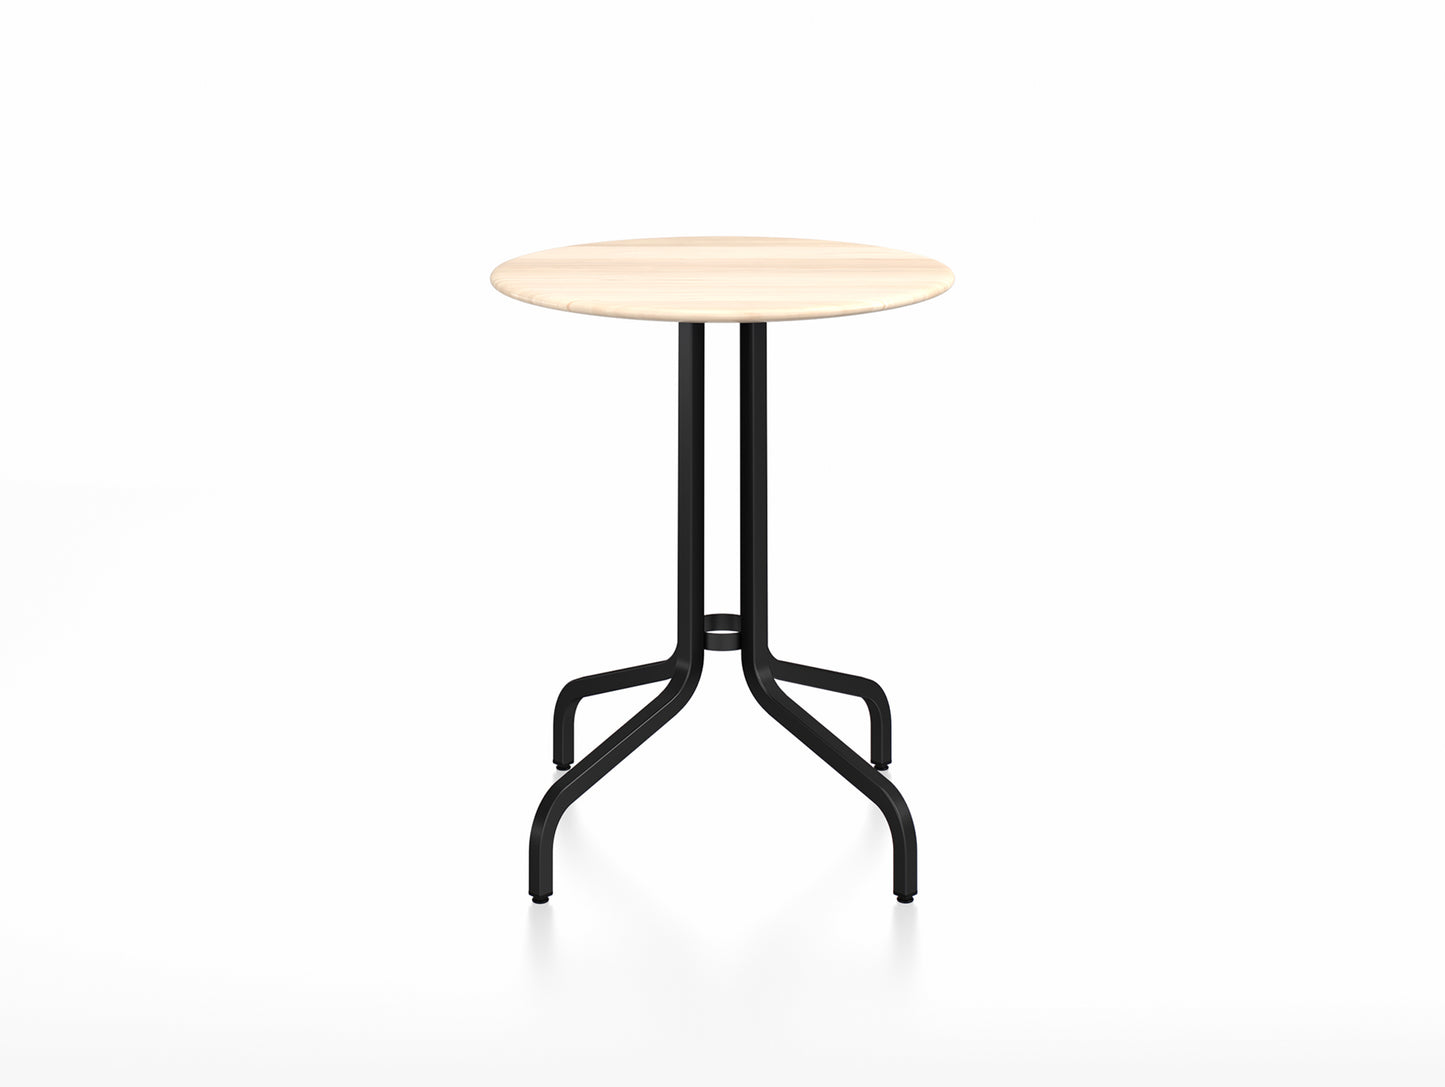 1 Inch Outdoor Cafe Table by Emeco - Round (Diameter: 60 cm) / Black Powder Coated Aluminium Base / Accoya Wood Tabletop